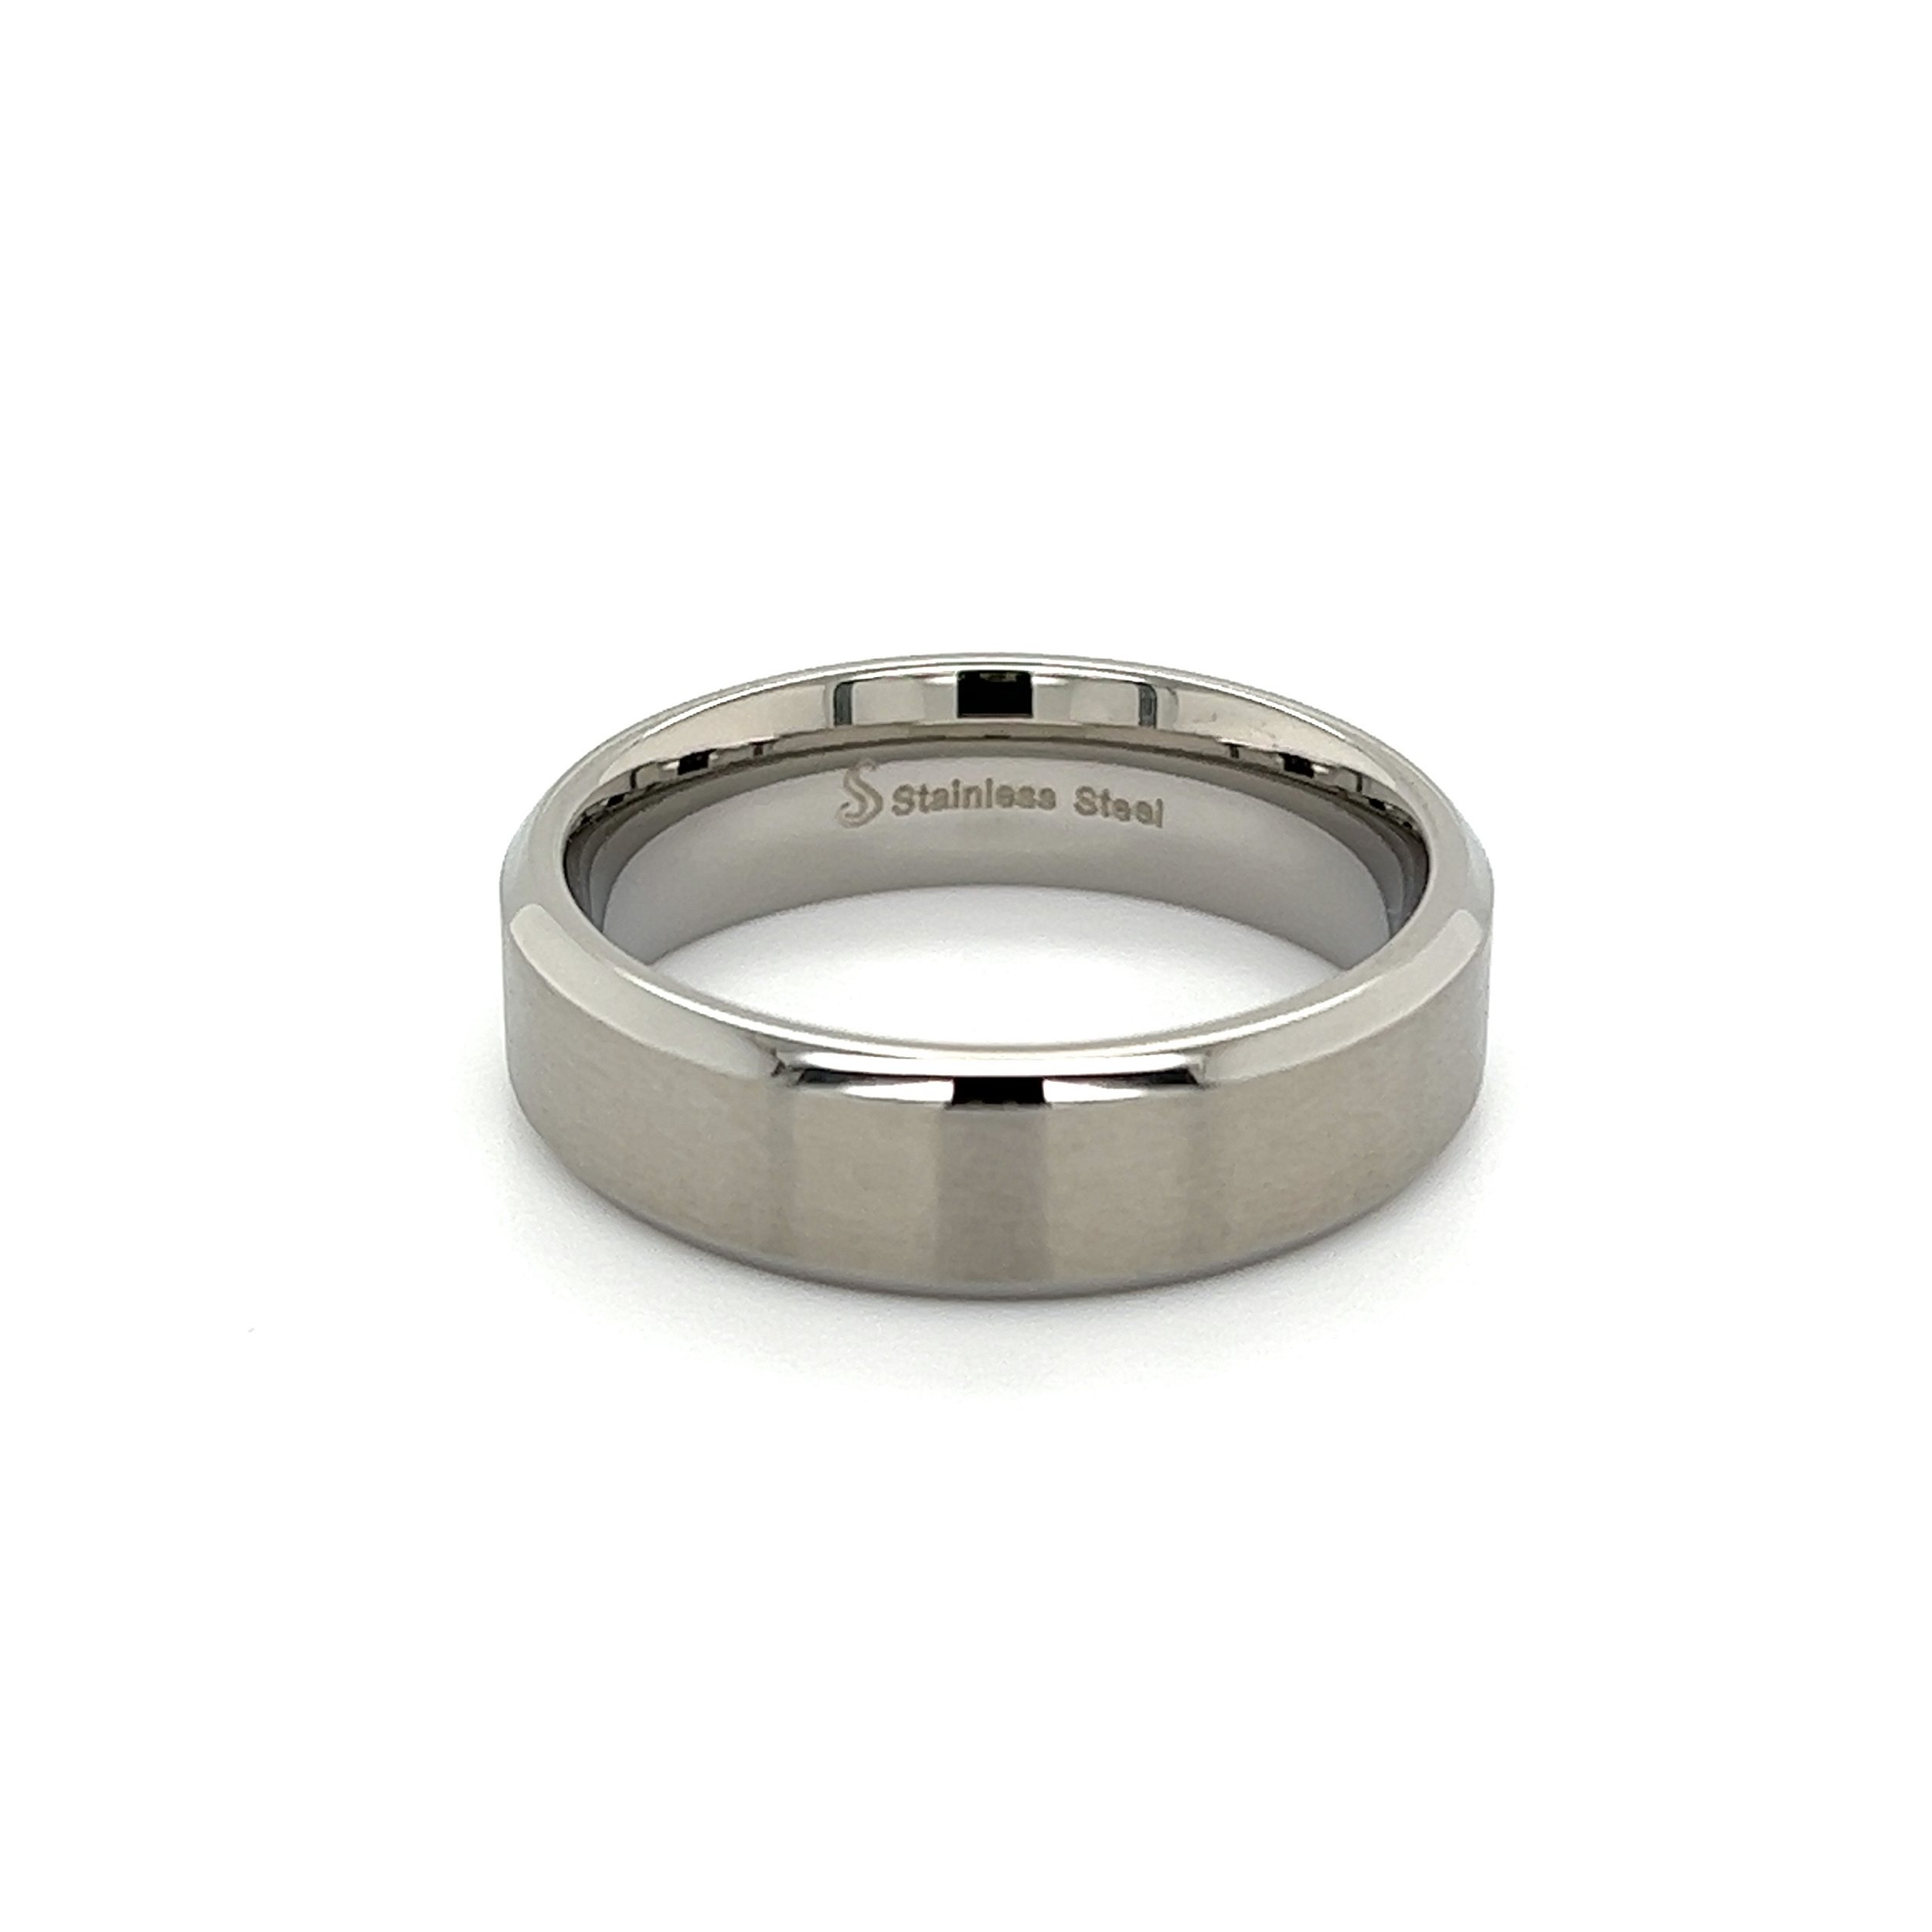 Mens Stainless Steel Brushed 7mm Band with Beveled Edge 8.6g, s12